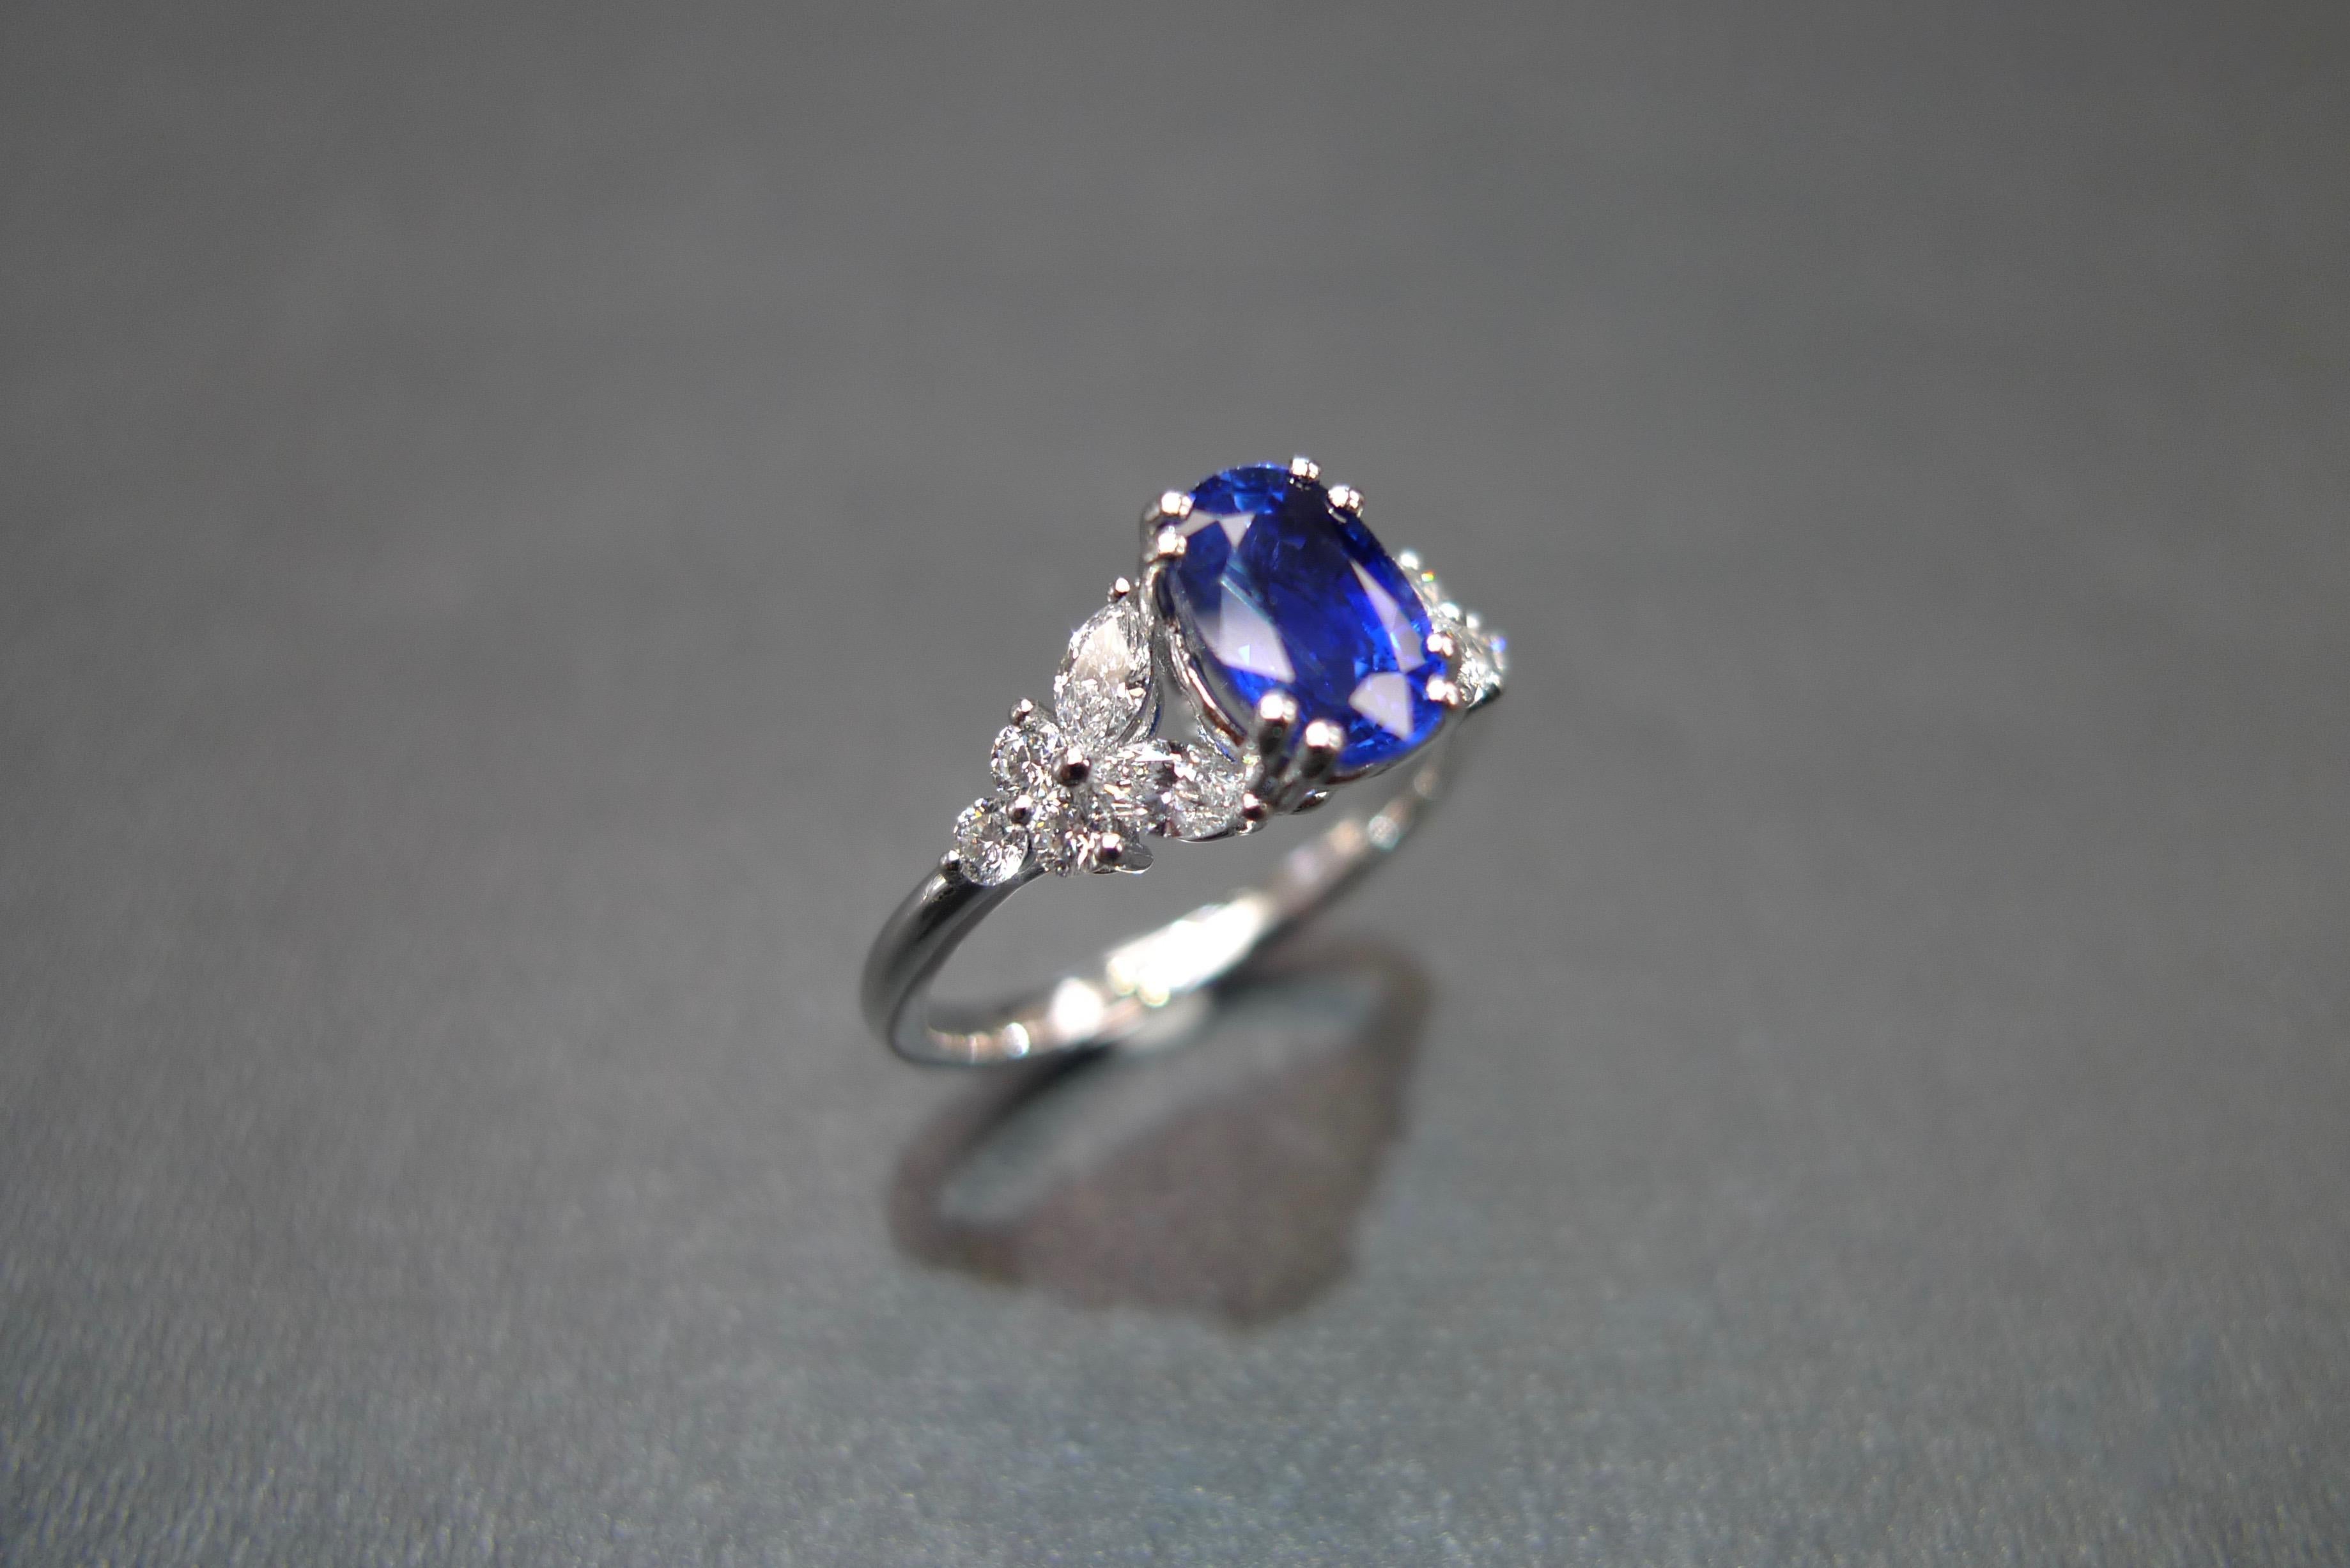 For Sale:  Blue Sapphire Engagement Ring with Marquise Cut Diamond in 18K White Gold 8